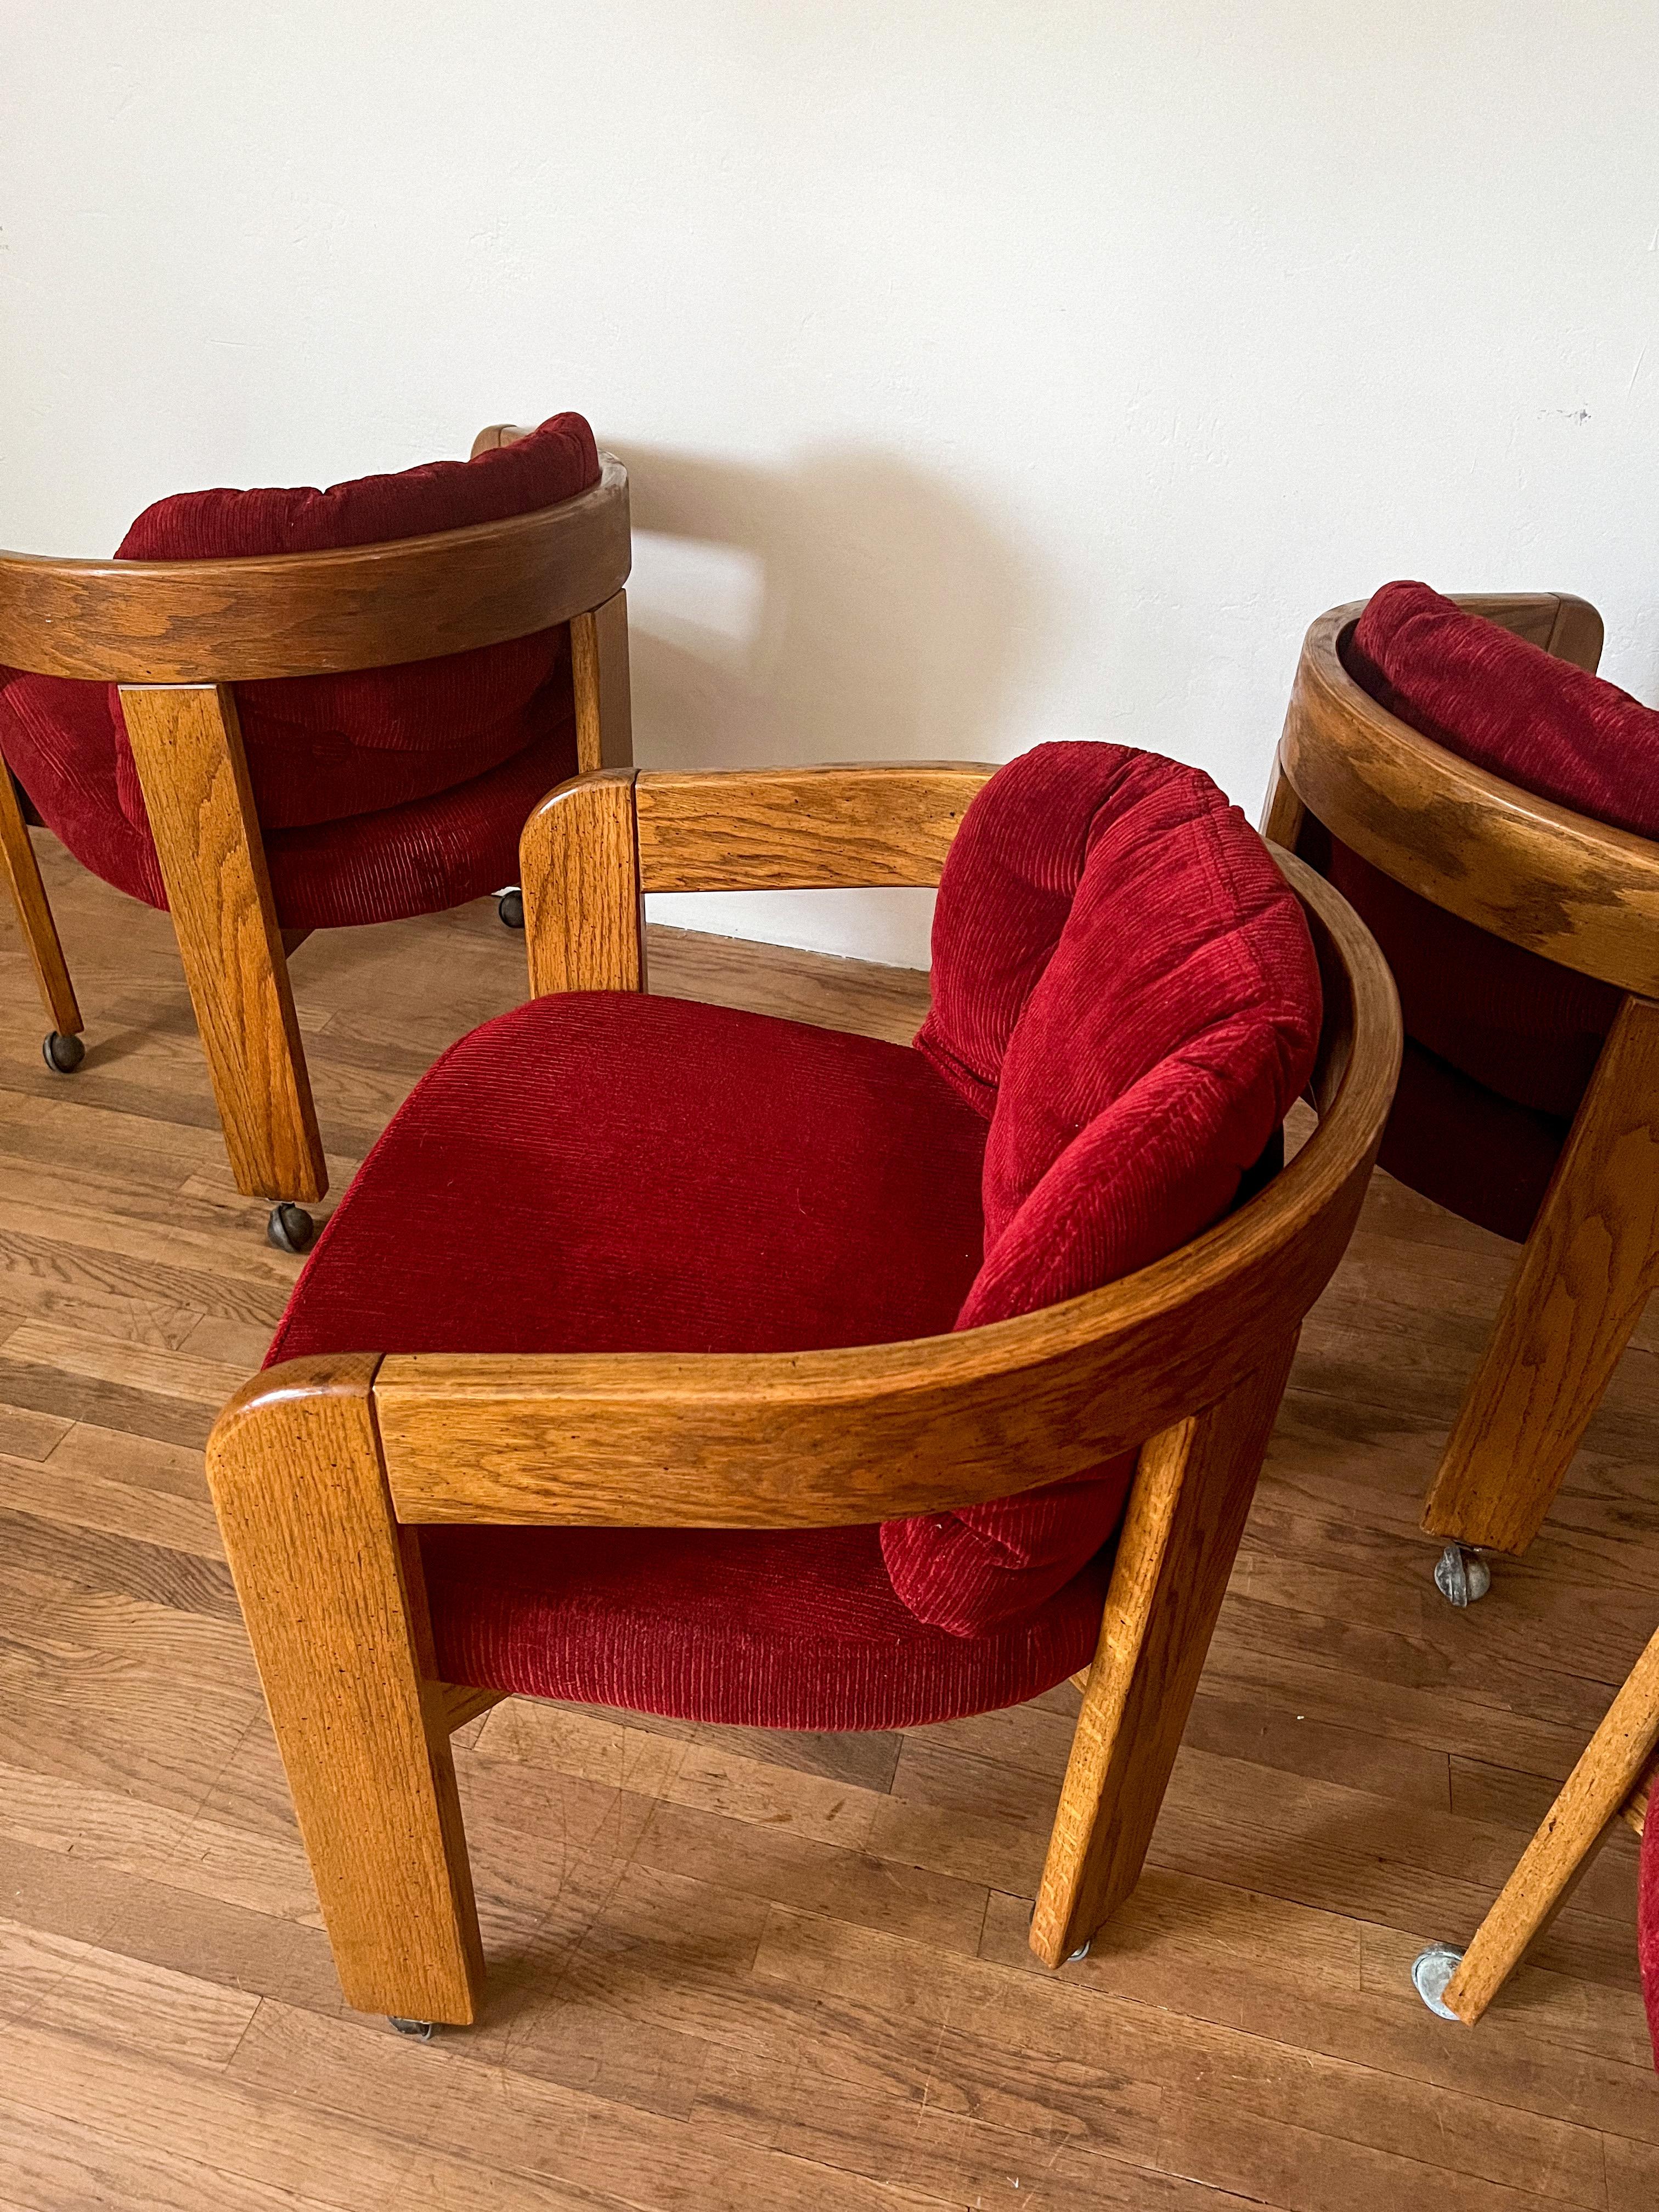 Set of 4 barrel dining chairs in casters. Circa 1970s. Chairs feature an oak frame and original burned red corduroy upholstery in excellent vintage condition.

Barrel style reminiscent of Tobia Scarpa’s Pigreco Chair.

All chairs come with a back